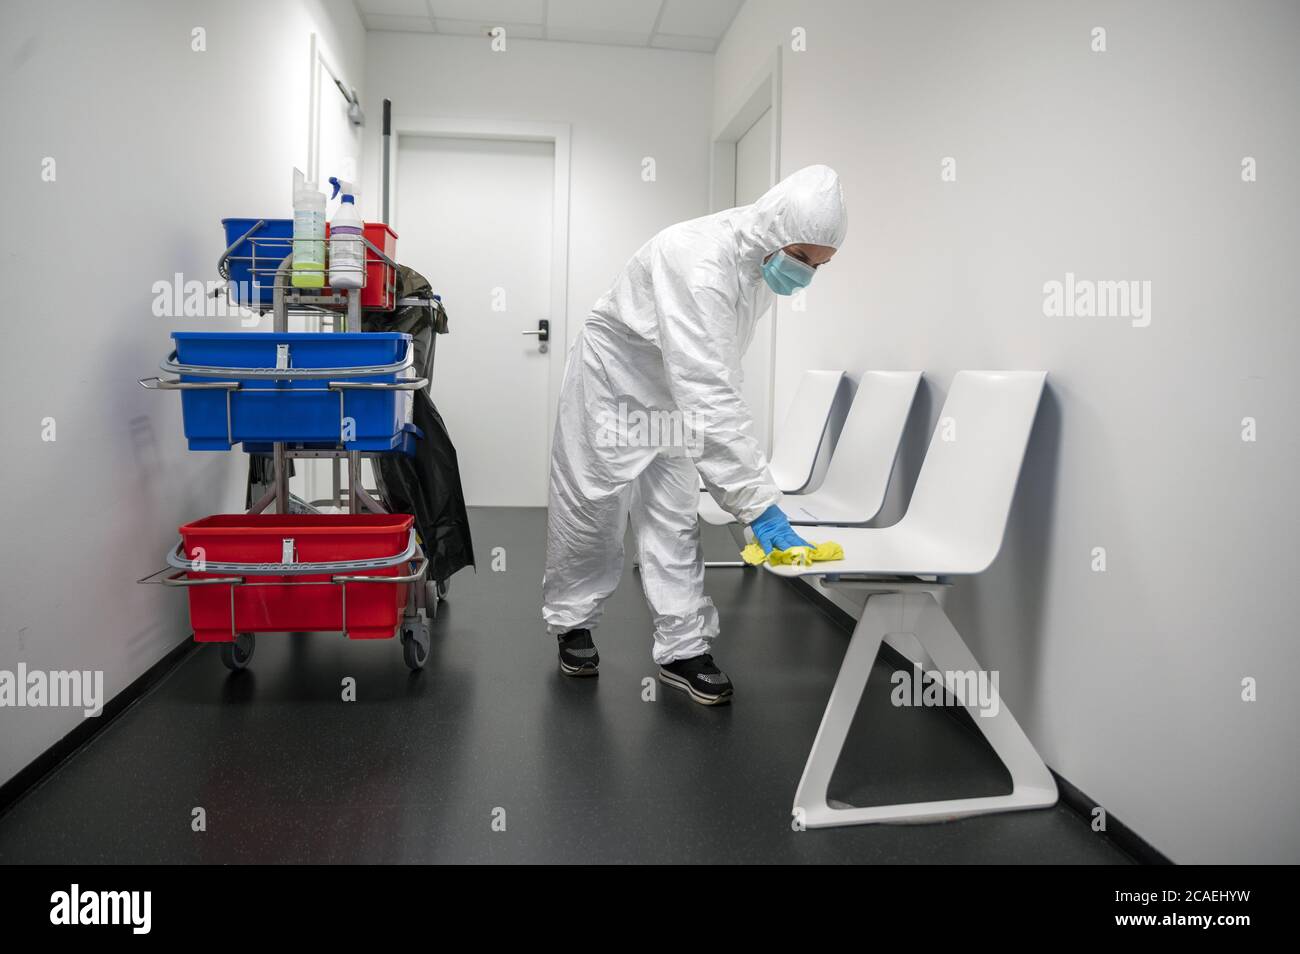 Alert Corona Virus or Covid-19. Cleaner with full protective suit, masks and gloves cleans, disinfects and sanitizes the waiting roorm and chairs. Stock Photo